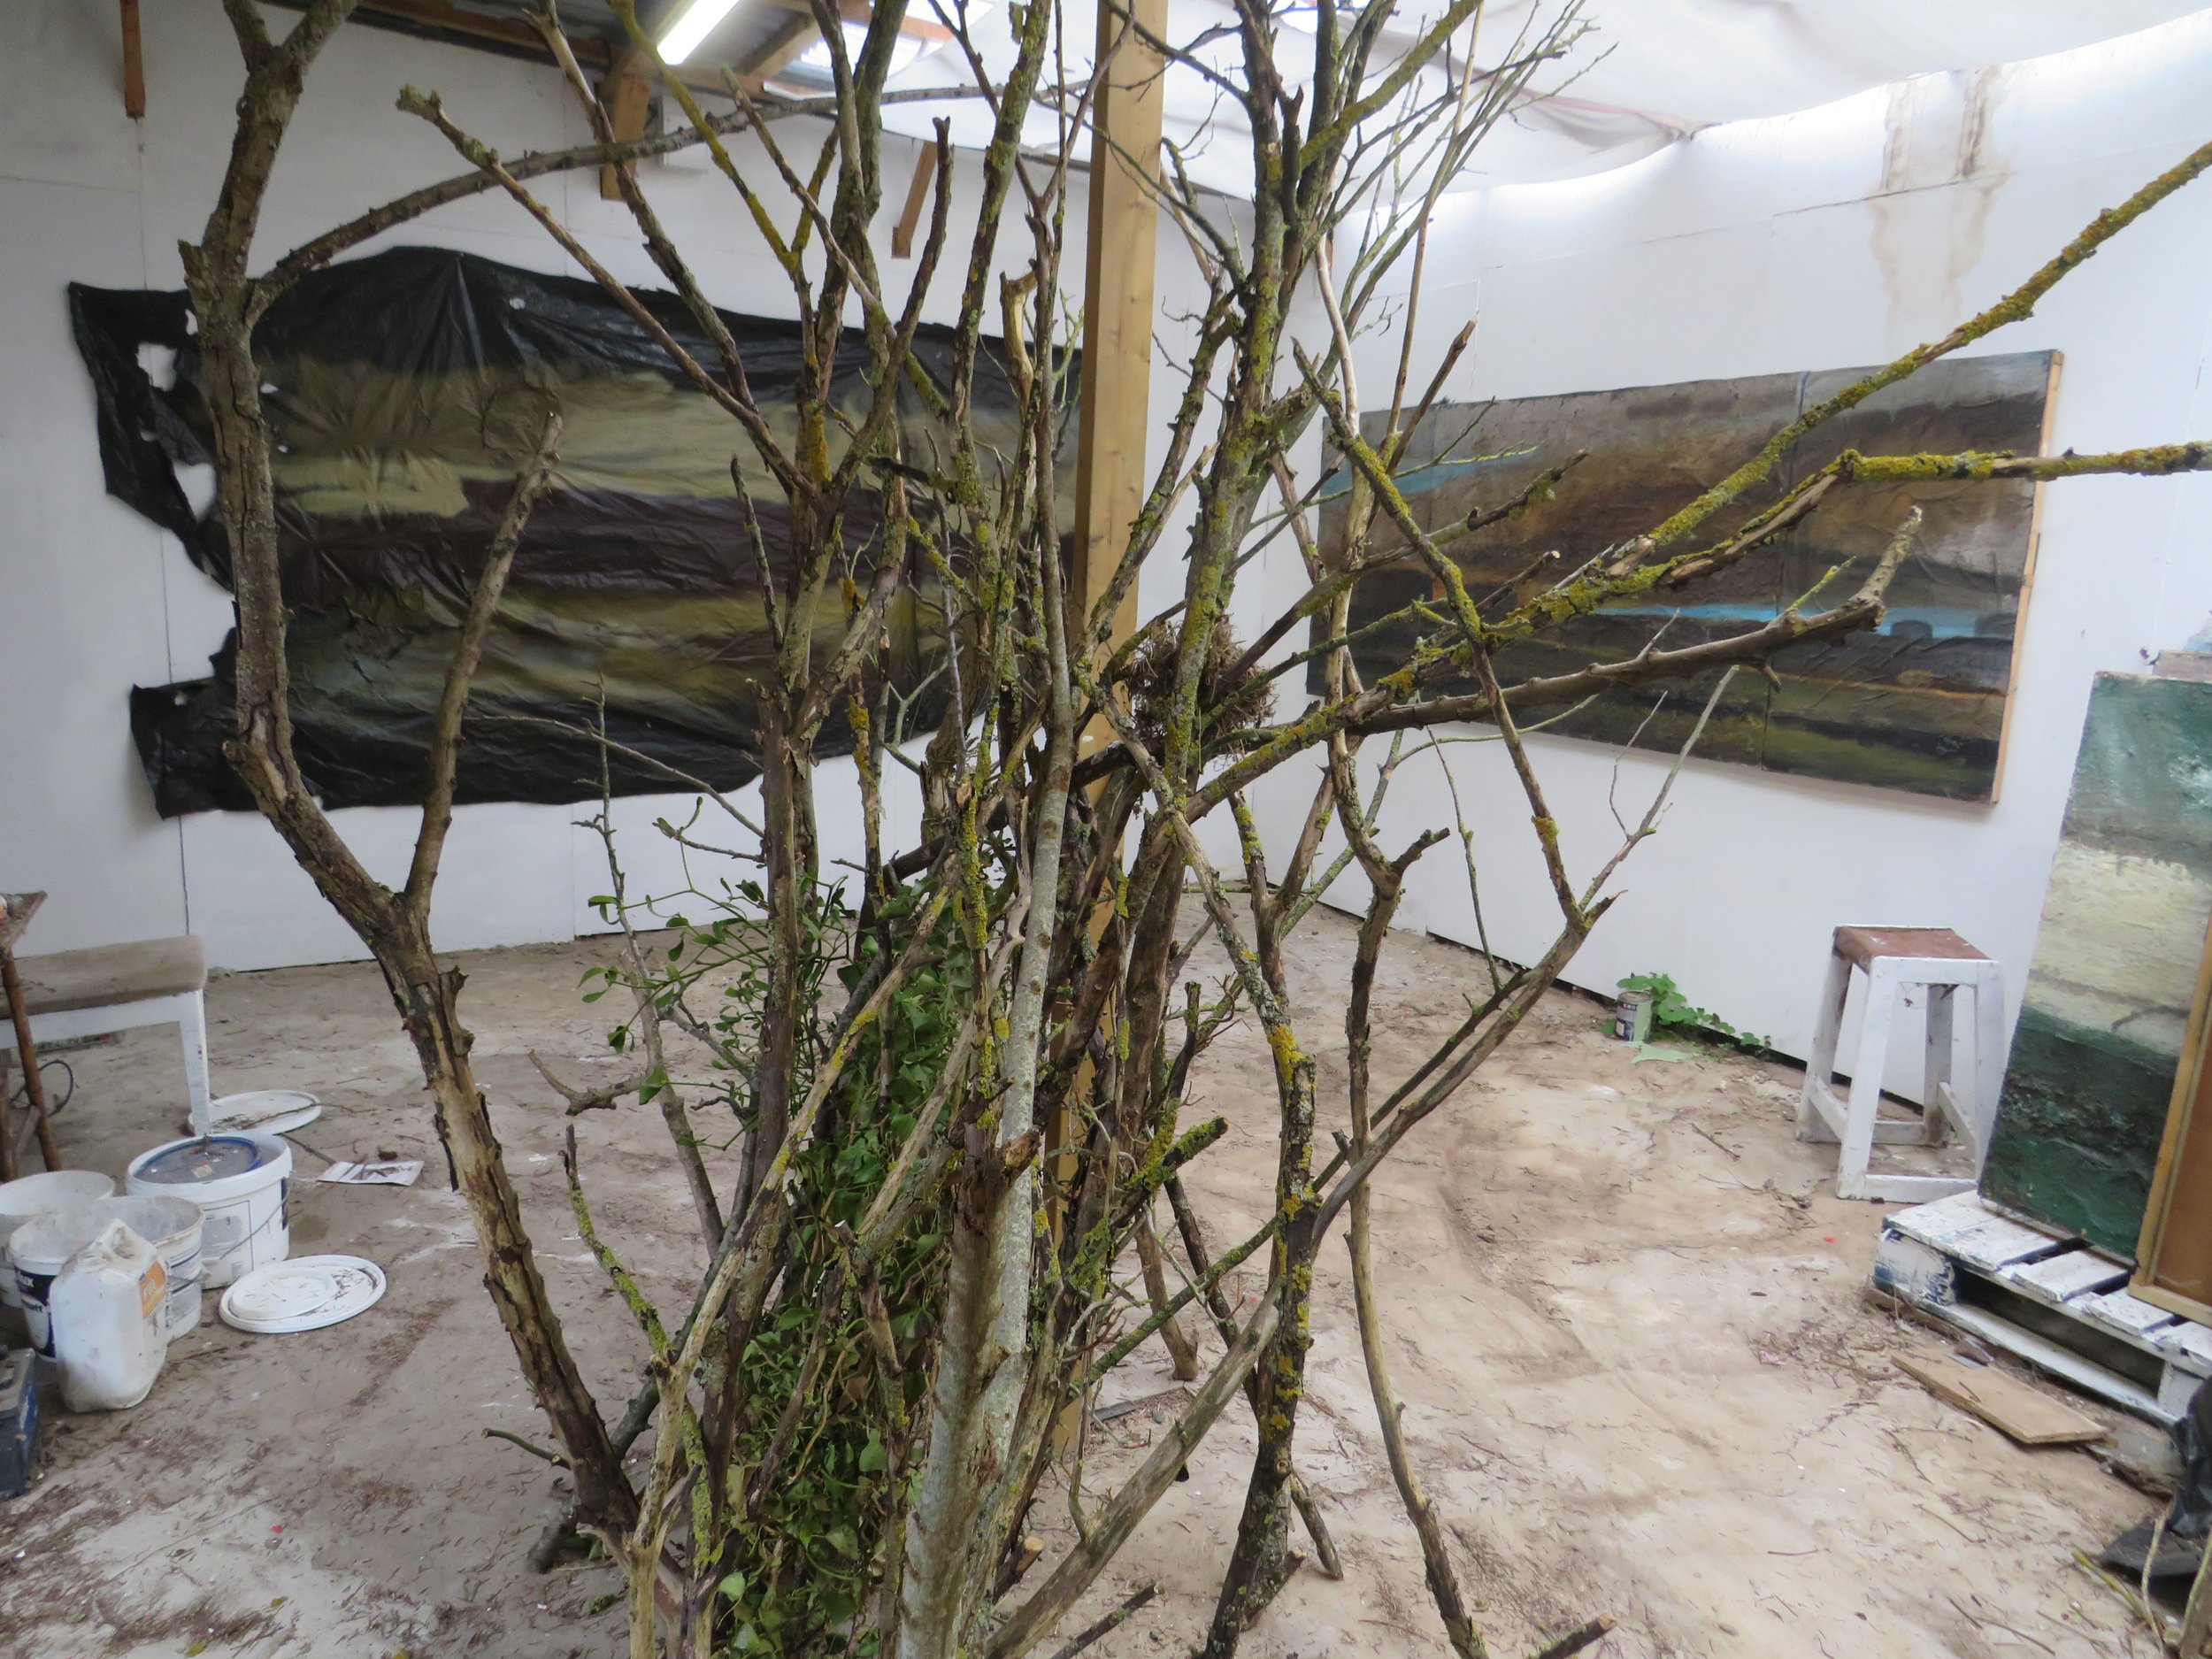 Bulldozed tree and nest reformed in the Studio